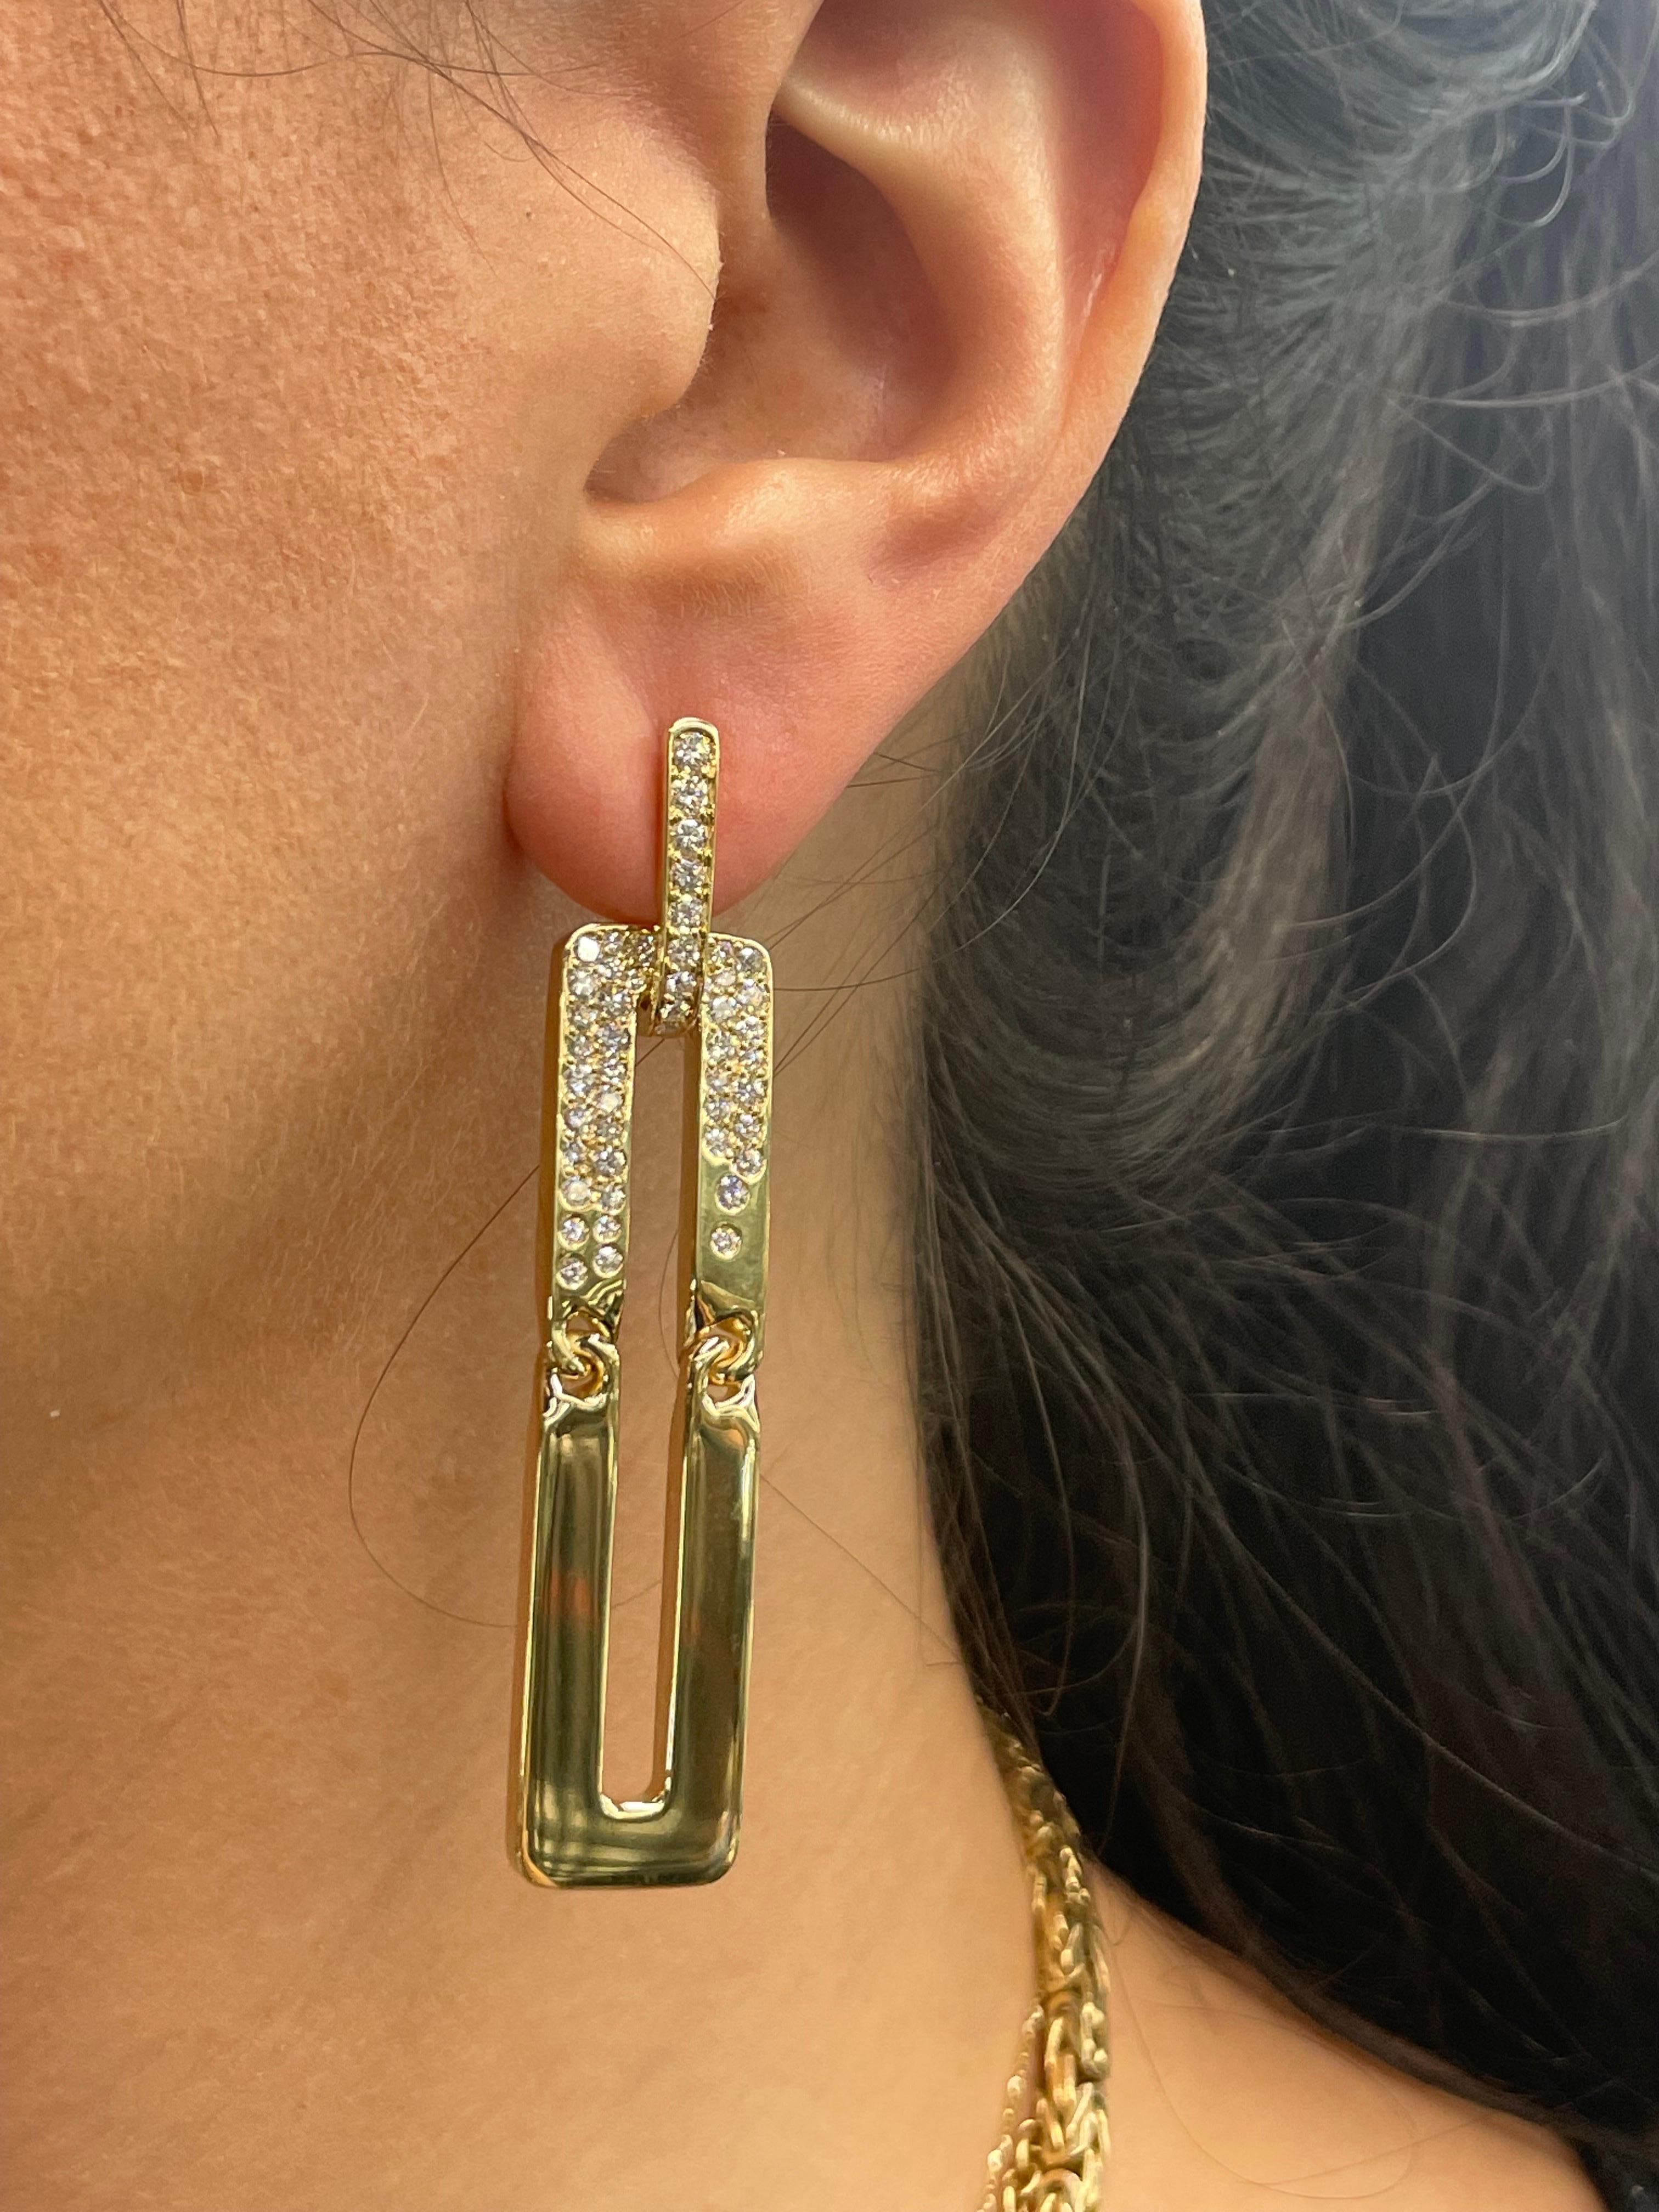 18 Karat Yellow Gold drop earrings featuring floating motif round brilliants weighing 1.80 Carats, 21.8 Grams.
Made in Italy 